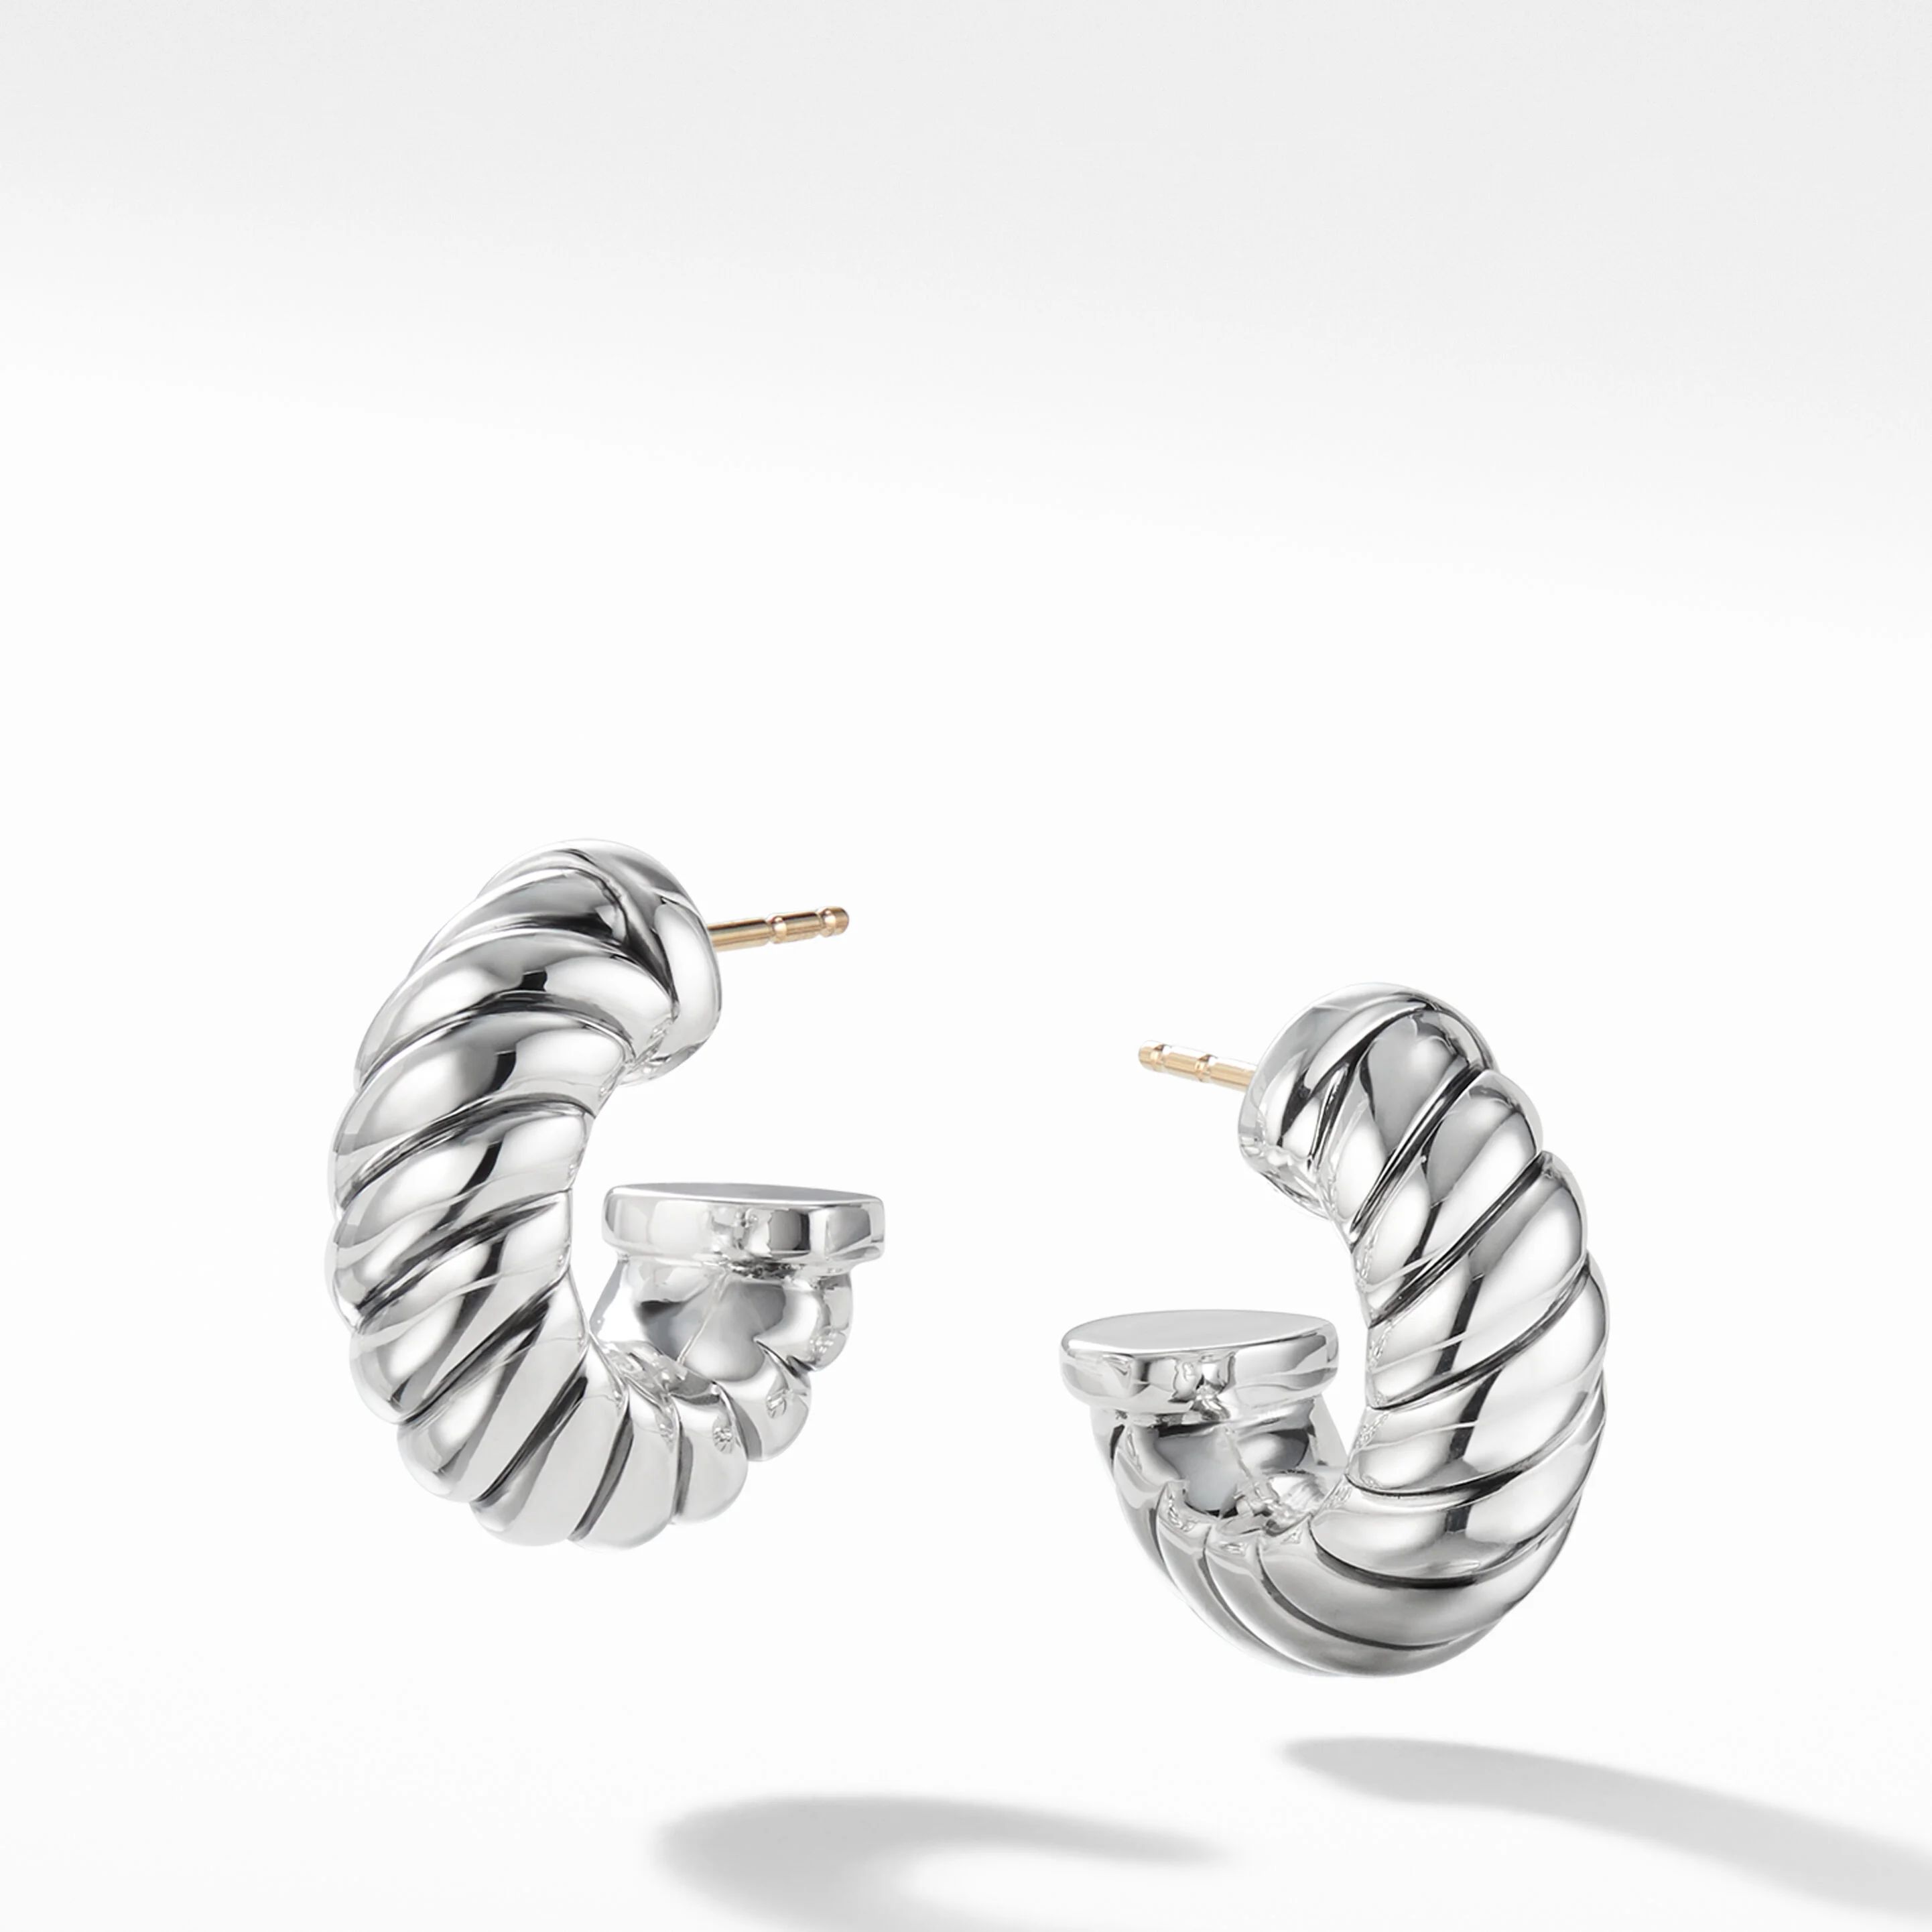 Sculpted Cable Shrimp Earrings in Sterling Silver | David Yurman